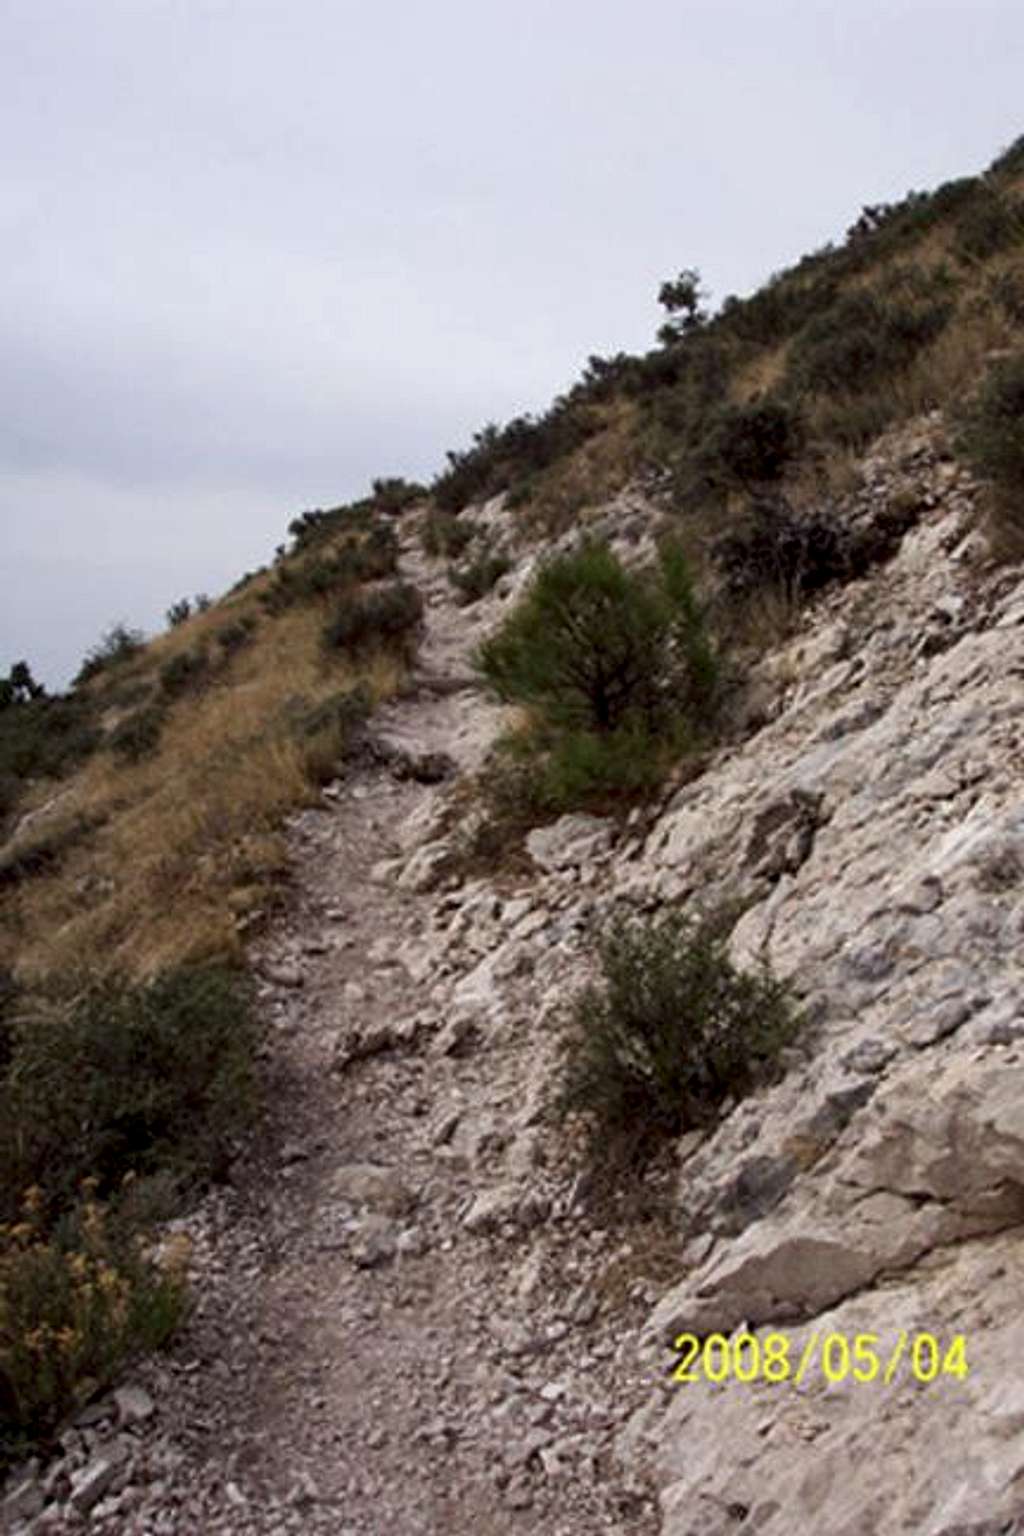 Guadalupe Peak -- Approaching the Summit (2008)